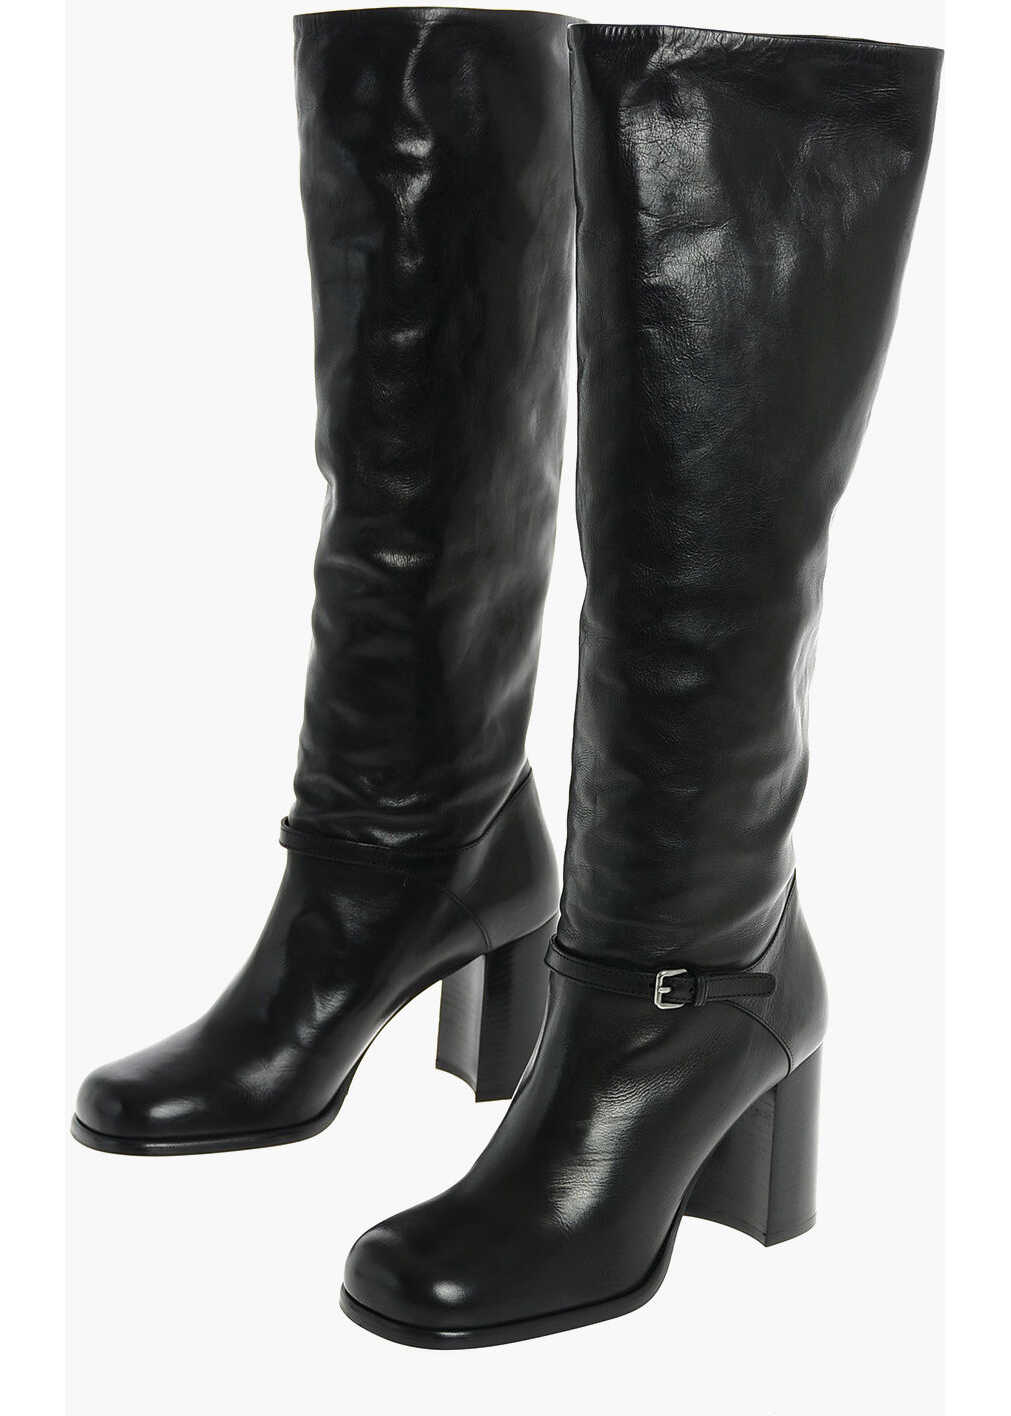 Miu Miu Over The Knee Leather Boots With Side Strap Black b-mall.ro